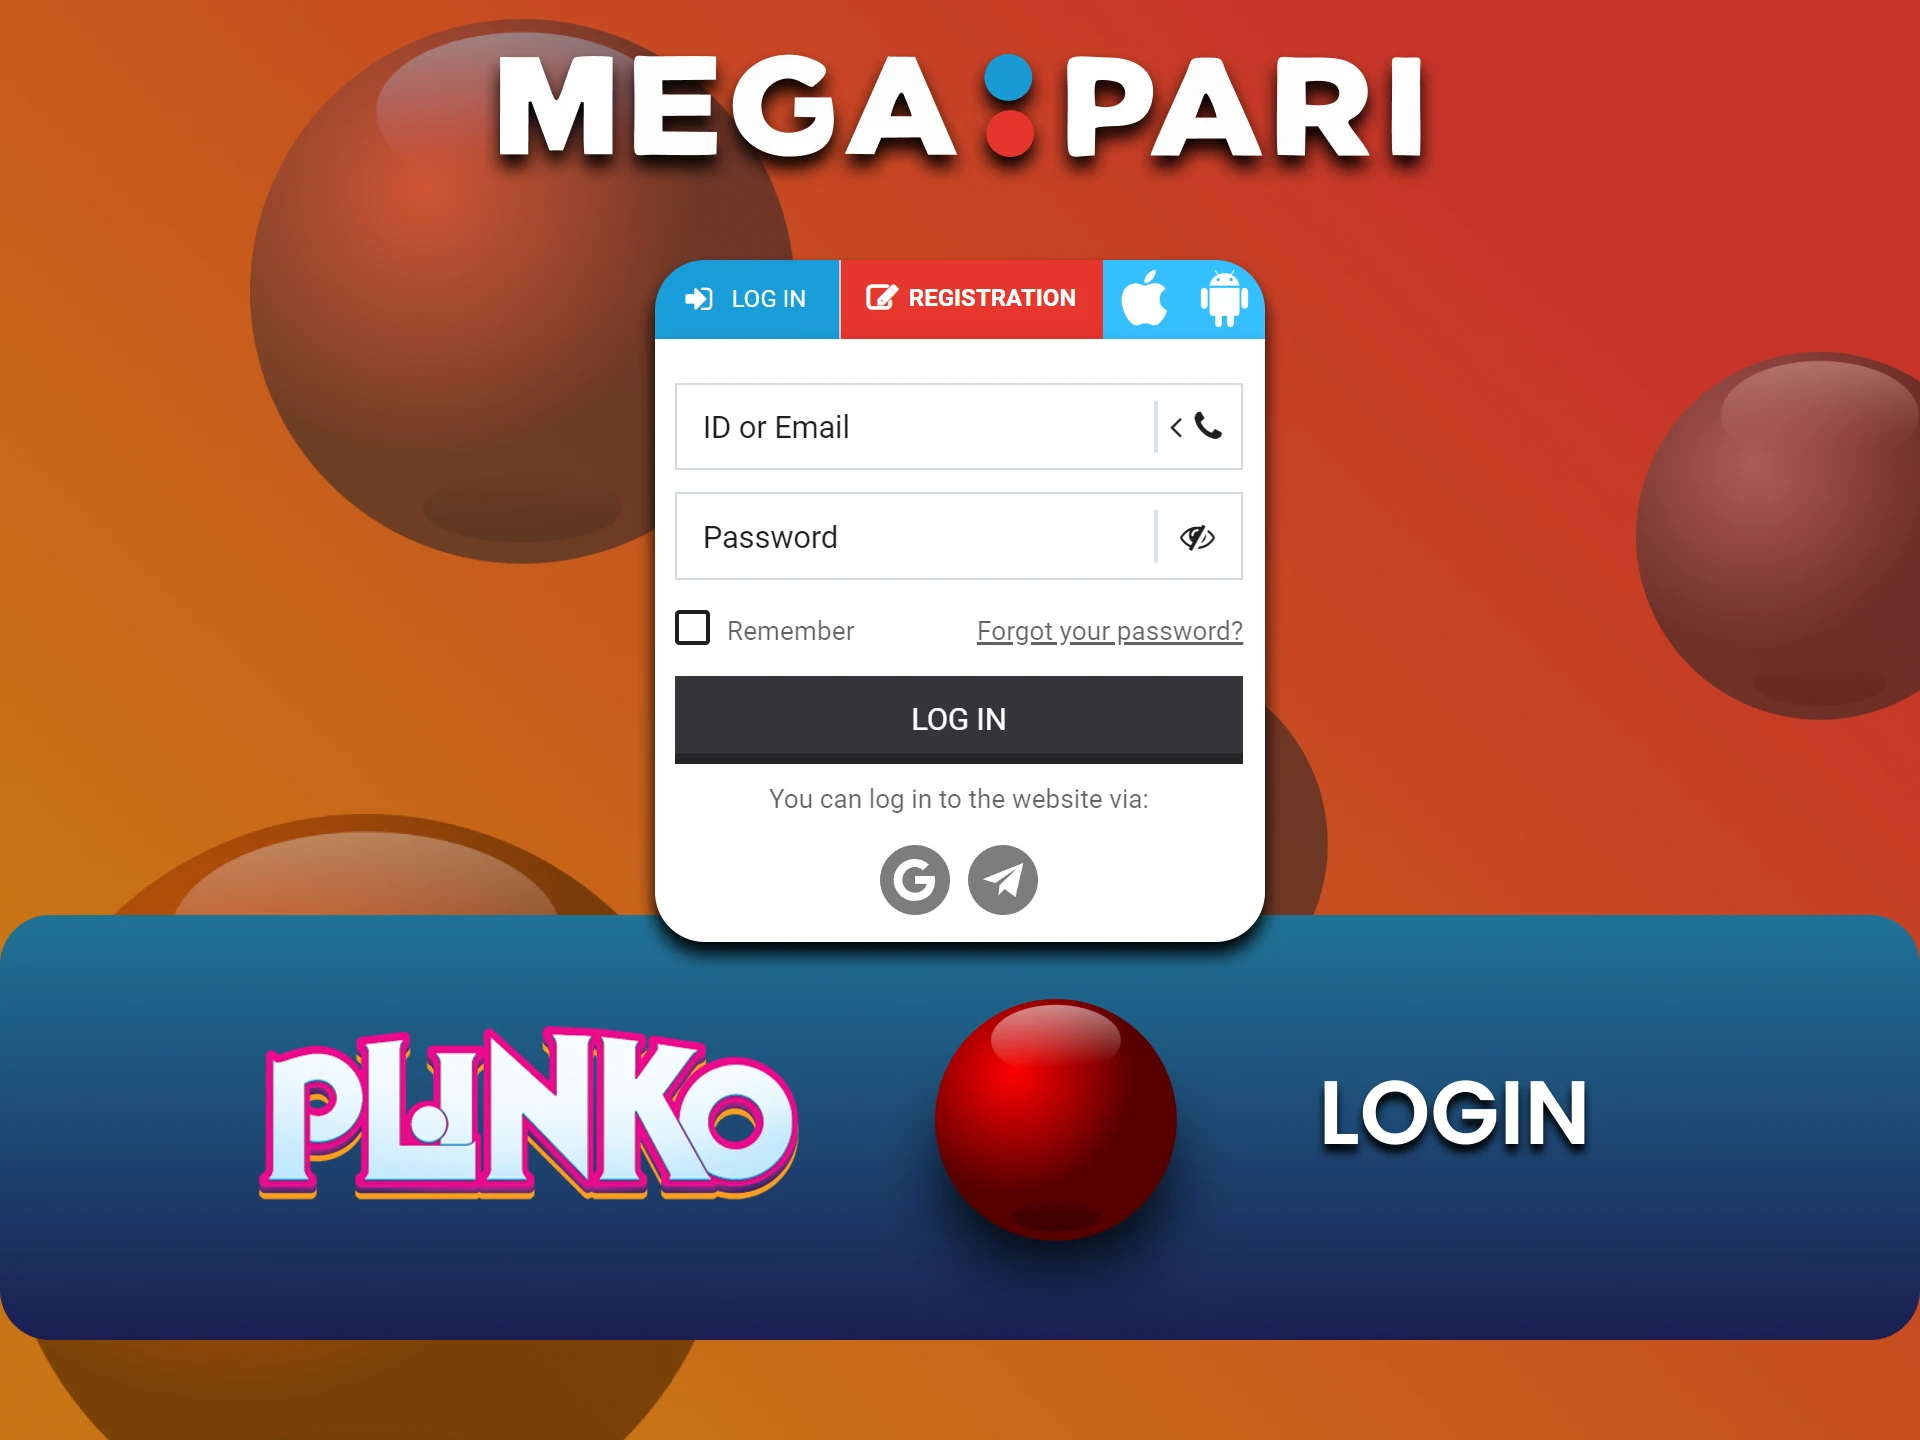 Sign in to your Megapari account for Plinko.